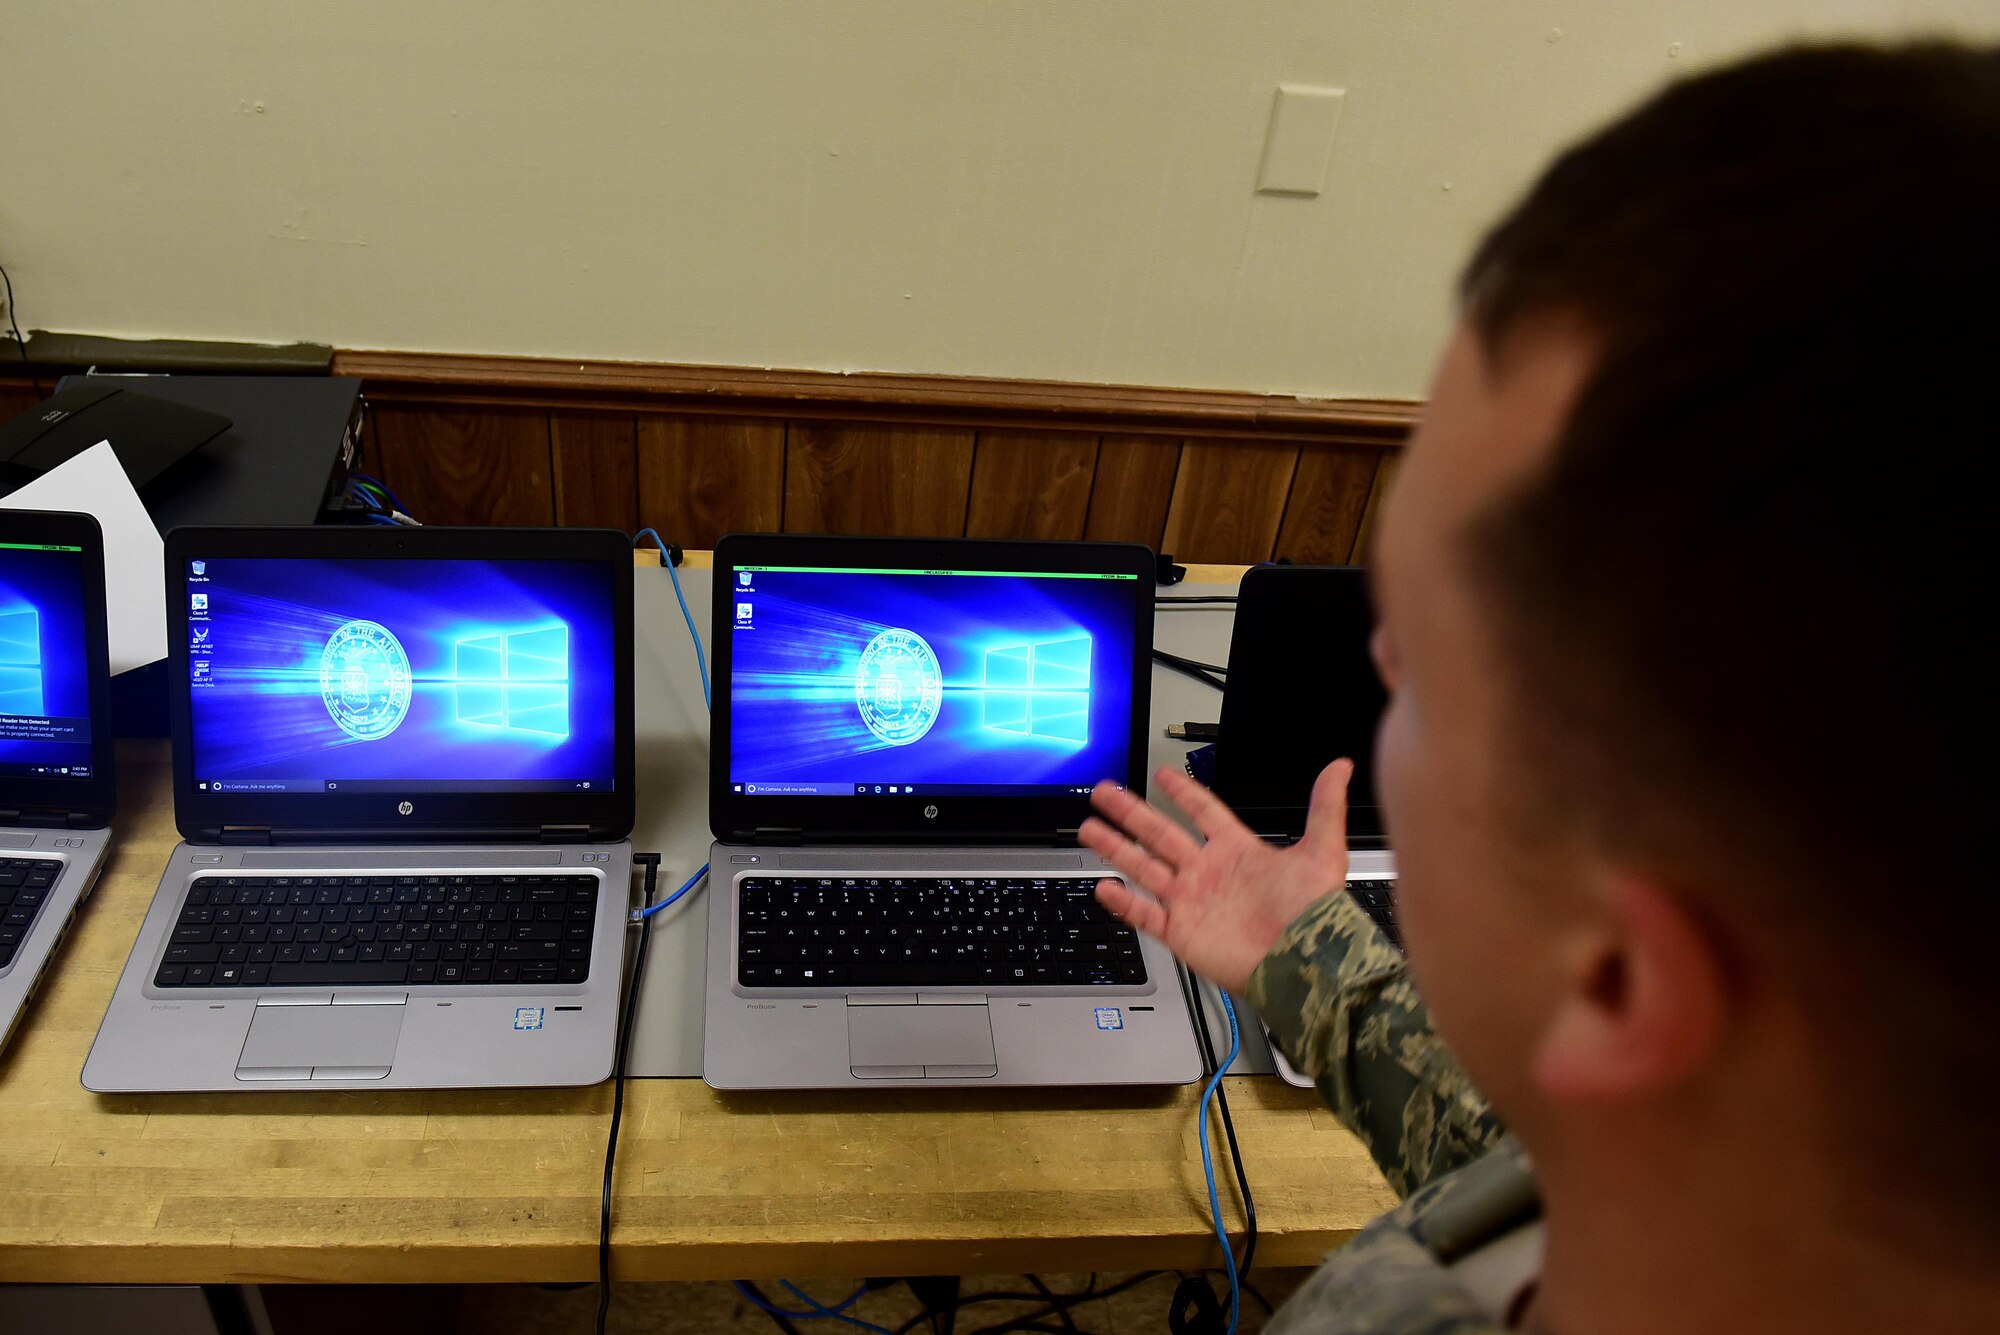 Airman 1st Class Joshua Burton, 4th Communications Squadron client services technician, discusses the process of migrating every computer on Seymour Johnson Air Force Base, North Carolina, to a new Windows 10 computer, July 12, 2017. According to Burton, every computer on base will be replaced with a new computer running Windows 10 by February 2018. (U.S. Air Force photo by Airman 1st Class Kenneth Boyton)